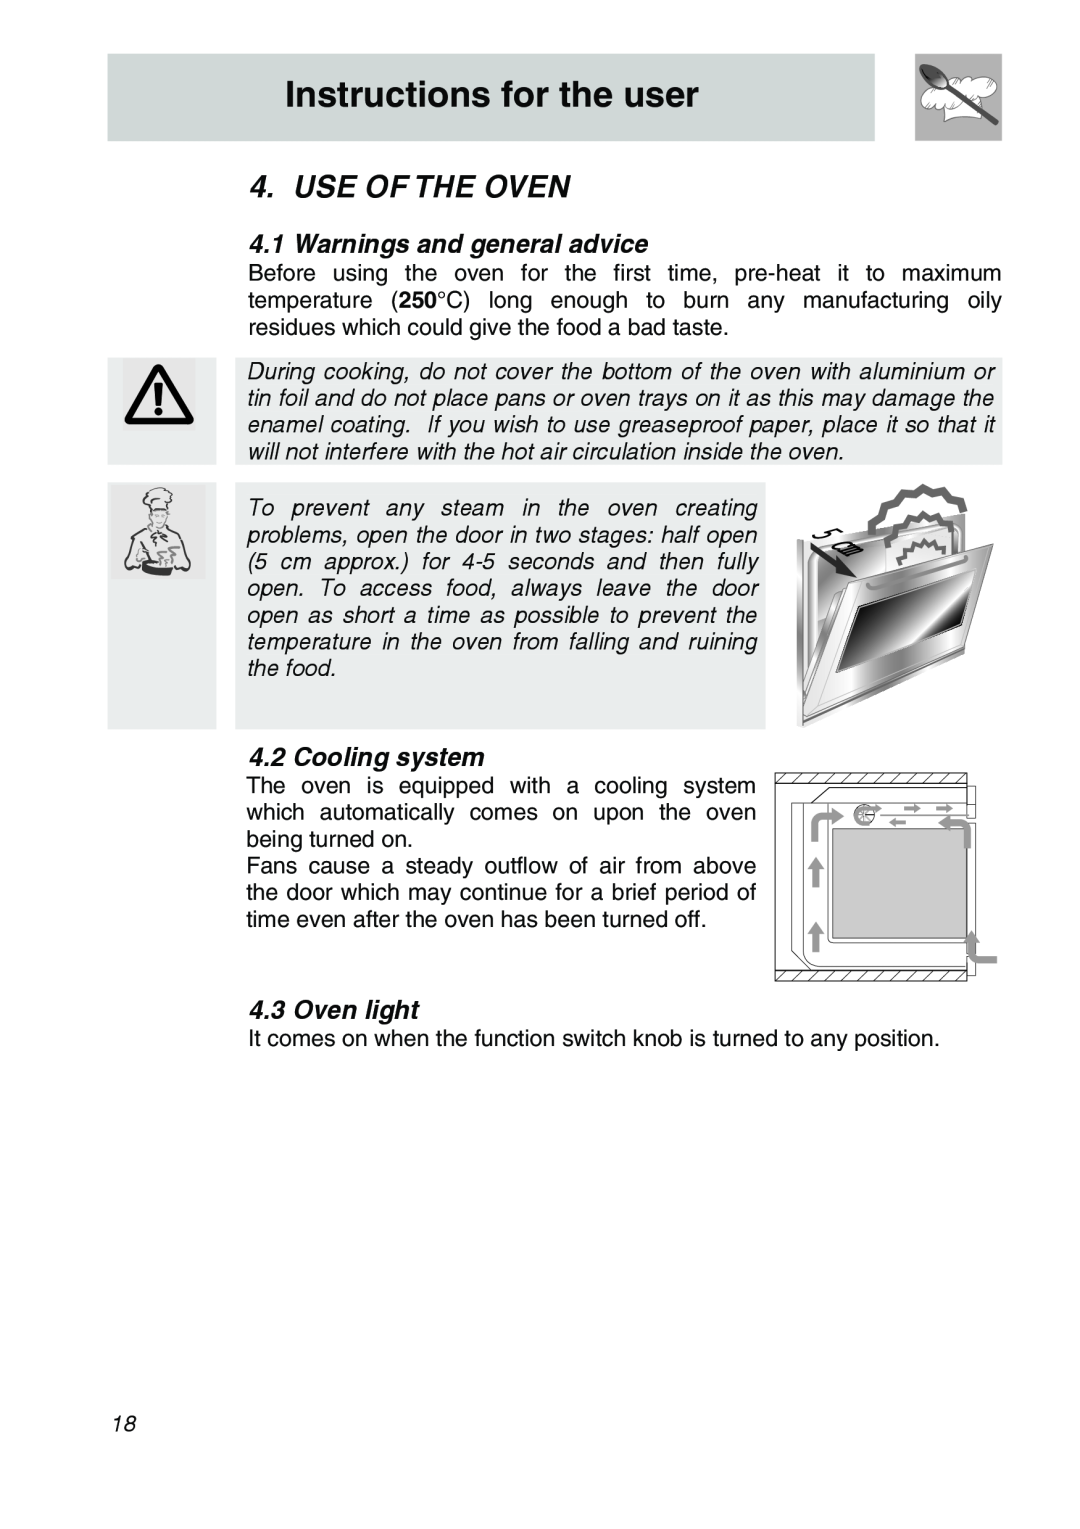 Smeg SA707X-7 manual Use Of The Oven, Warnings and general advice, Cooling system, Oven light, Instructions for the user 